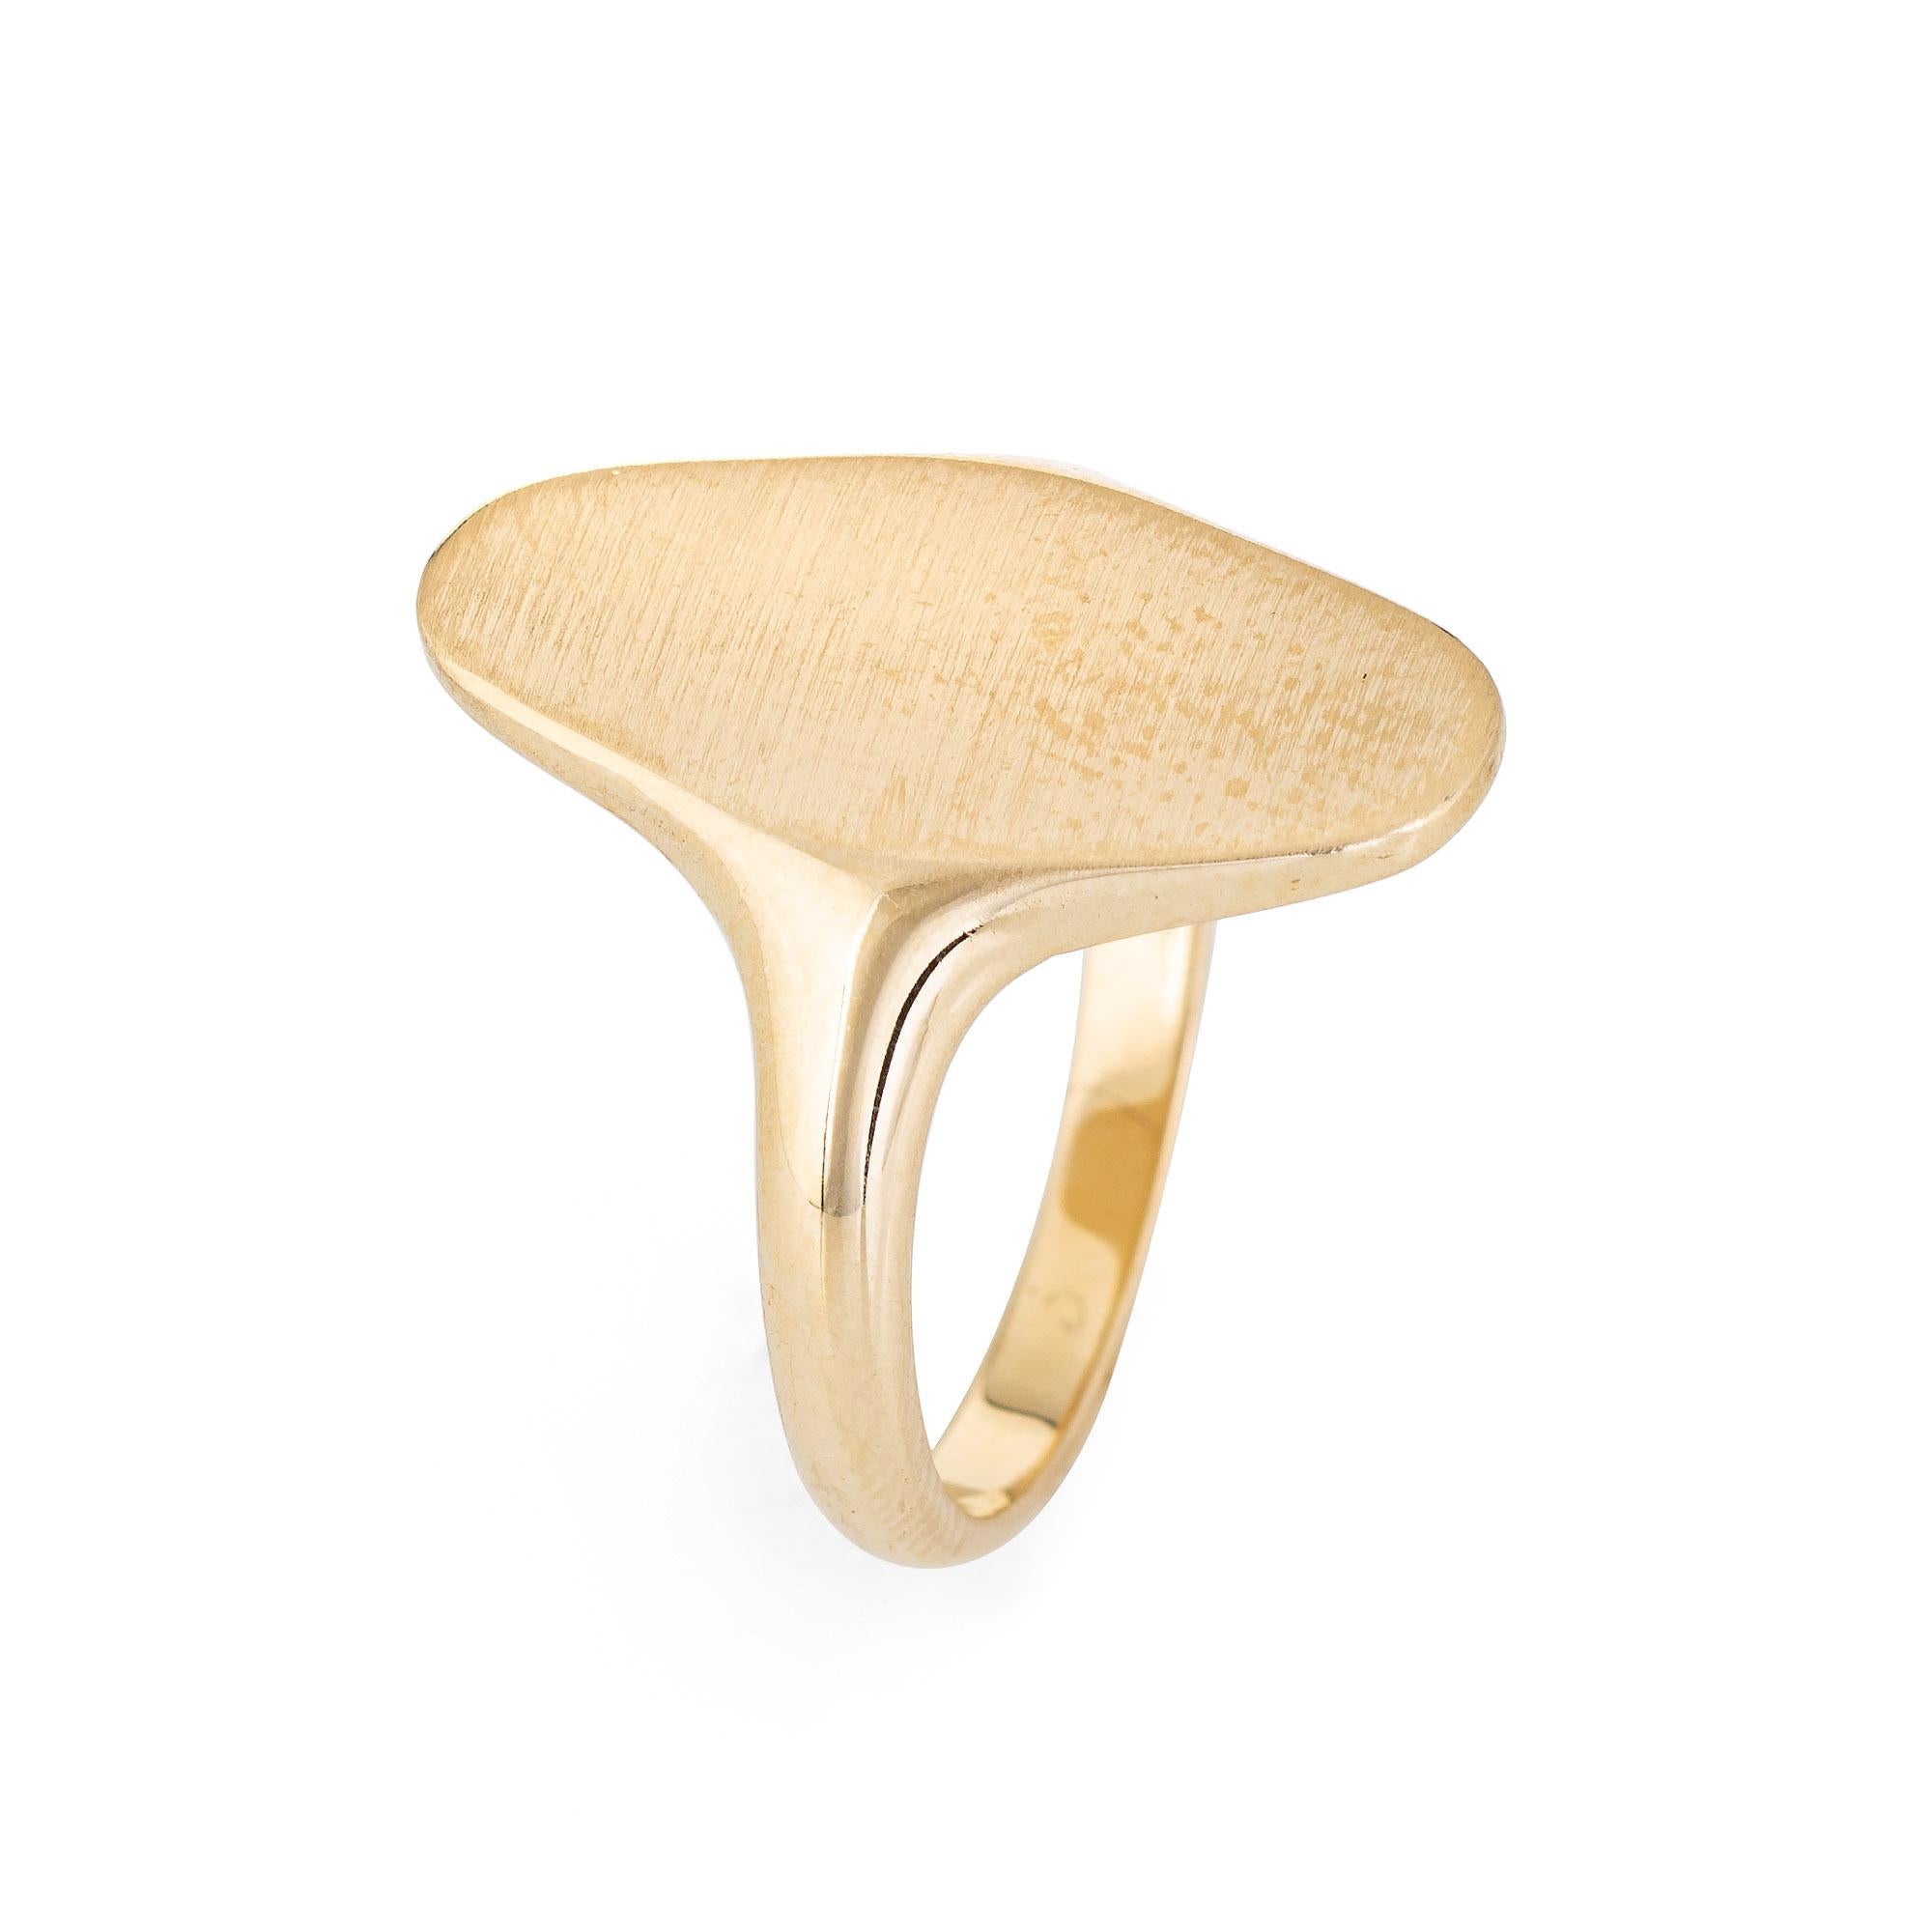 Stylish vintage oval signet ring crafted in 14 karat yellow gold. 

The long oval signet mount is currently unadorned and can be customized if desired. The ring sits flat and comfortably on the finger (rising 1.5mm - 0.05 inches).  

The ring is in